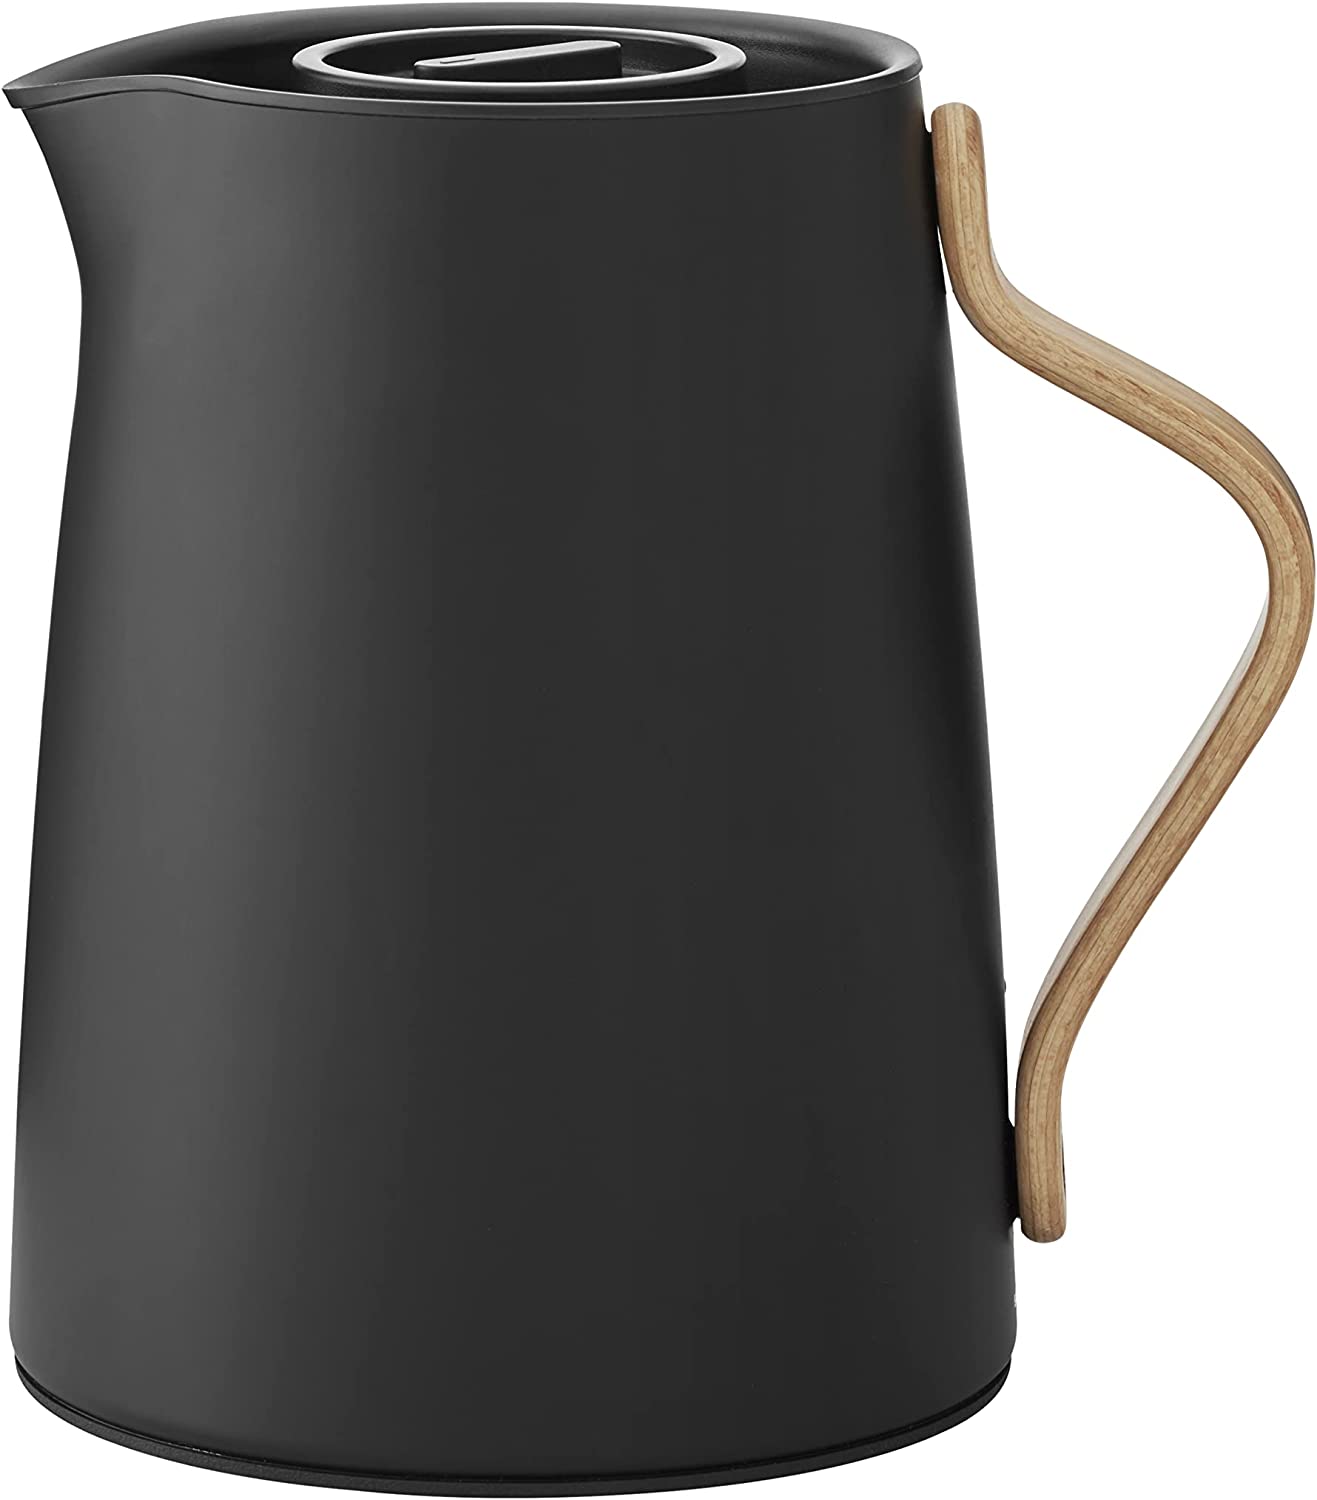 Stelton Emma Tea Insulated Jug - Insulated Plastic Teapot with Lid & Stainless Steel Thermal Insert - Modern Design, Clever, Integrated Infusion Filter & Beech Wood Handle - 1 Litre, Matt Black